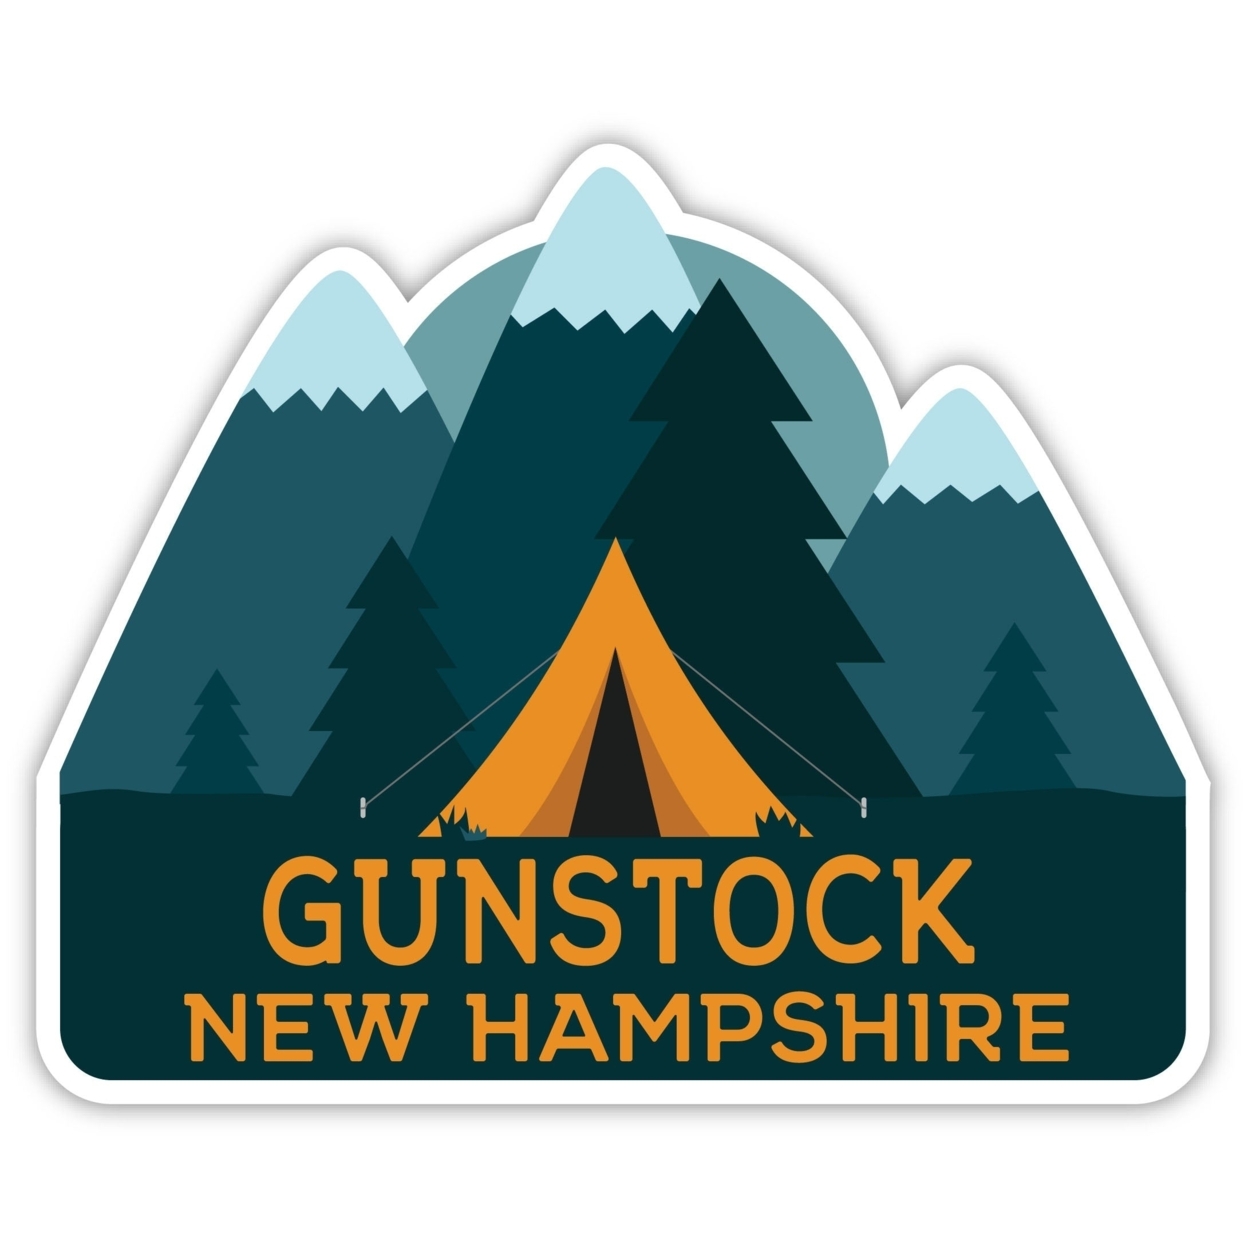 Gunstock New Hampshire Souvenir Decorative Stickers (Choose Theme And Size) - 4-Pack, 6-Inch, Tent